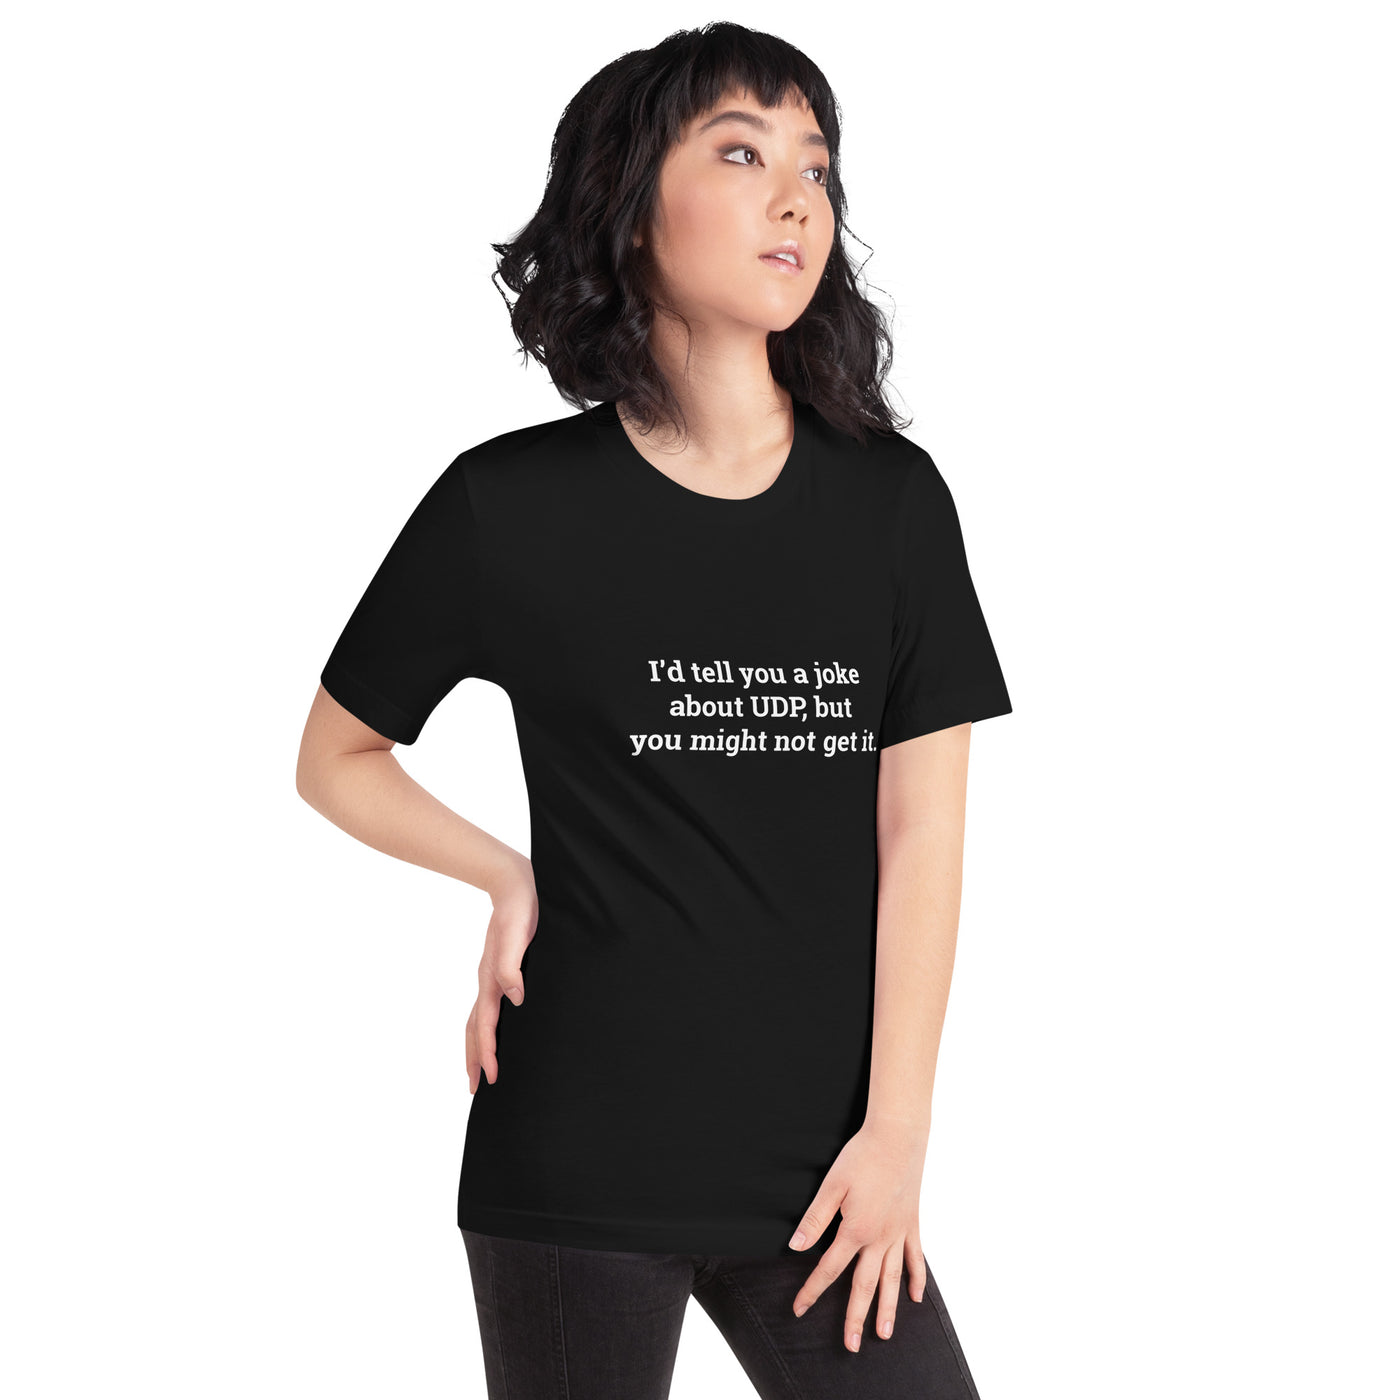 I'd tell you a joke about UDP, but you might not get it V2 - Unisex t-shirt